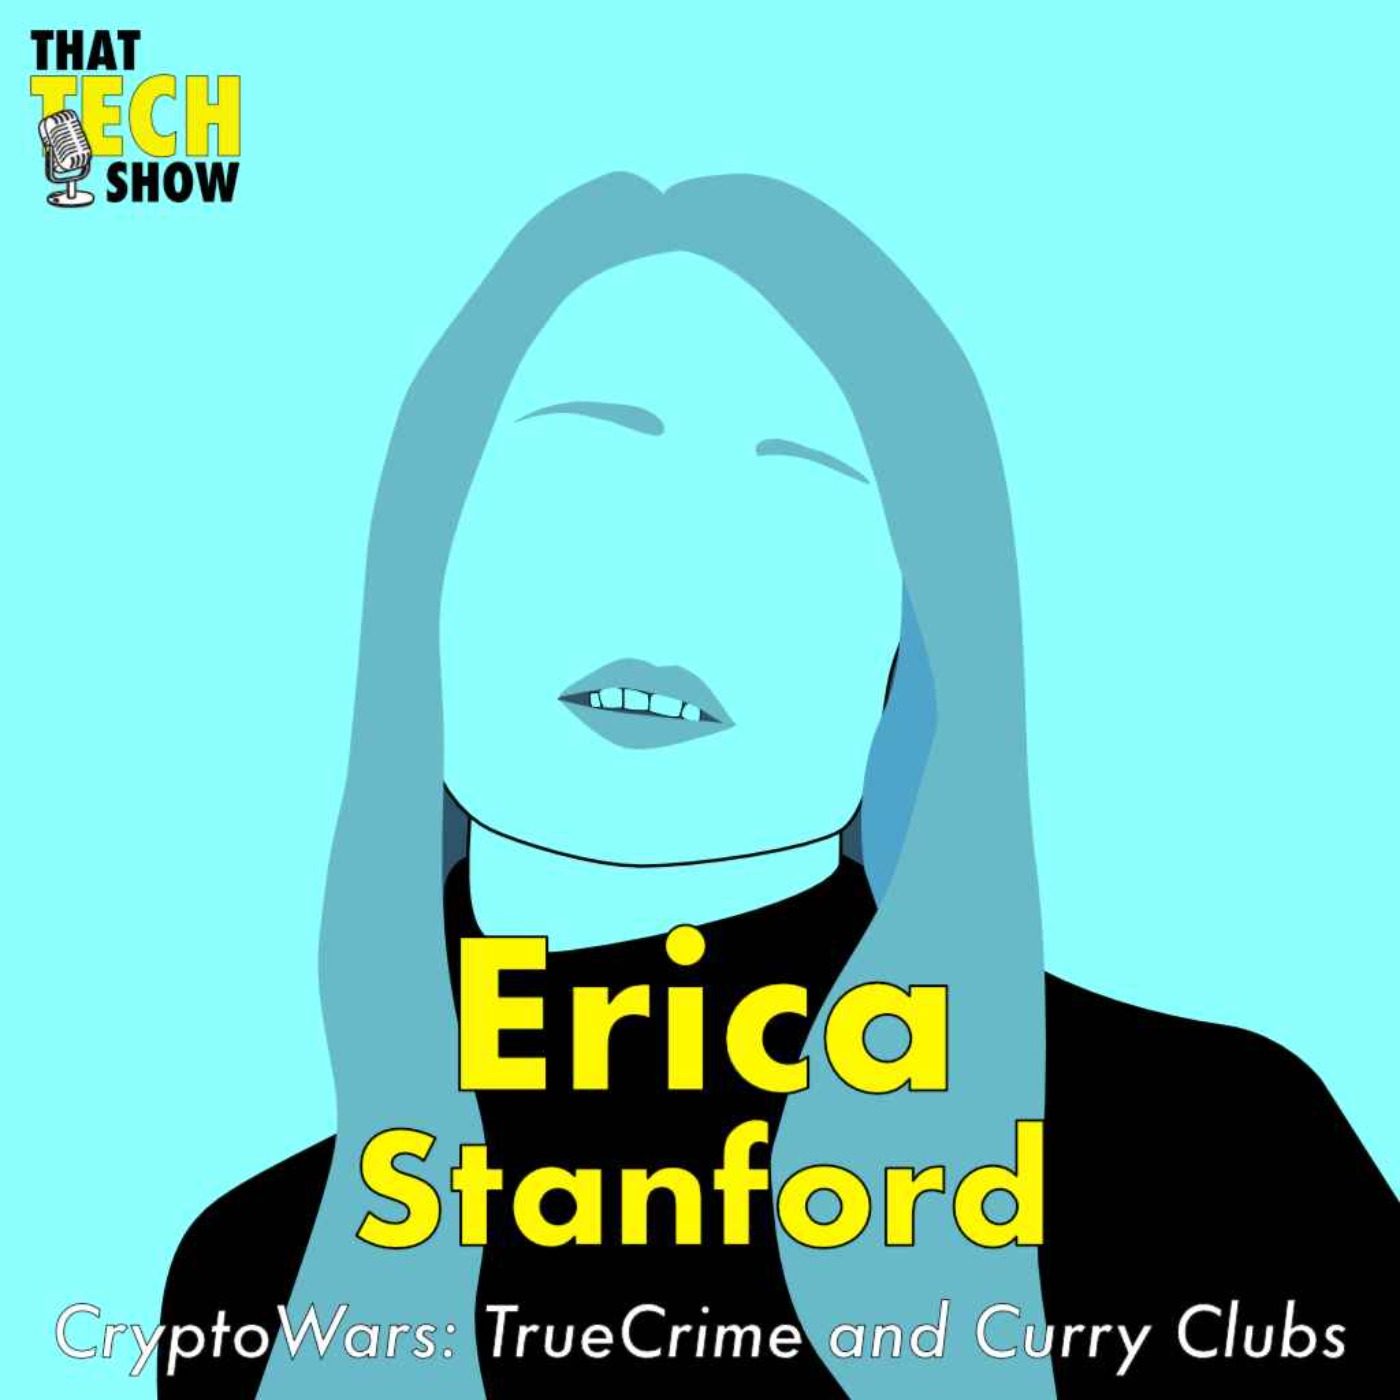 Episode 28 - CryptoWars: TrueCrime and Curry Clubs with Erica Stanford